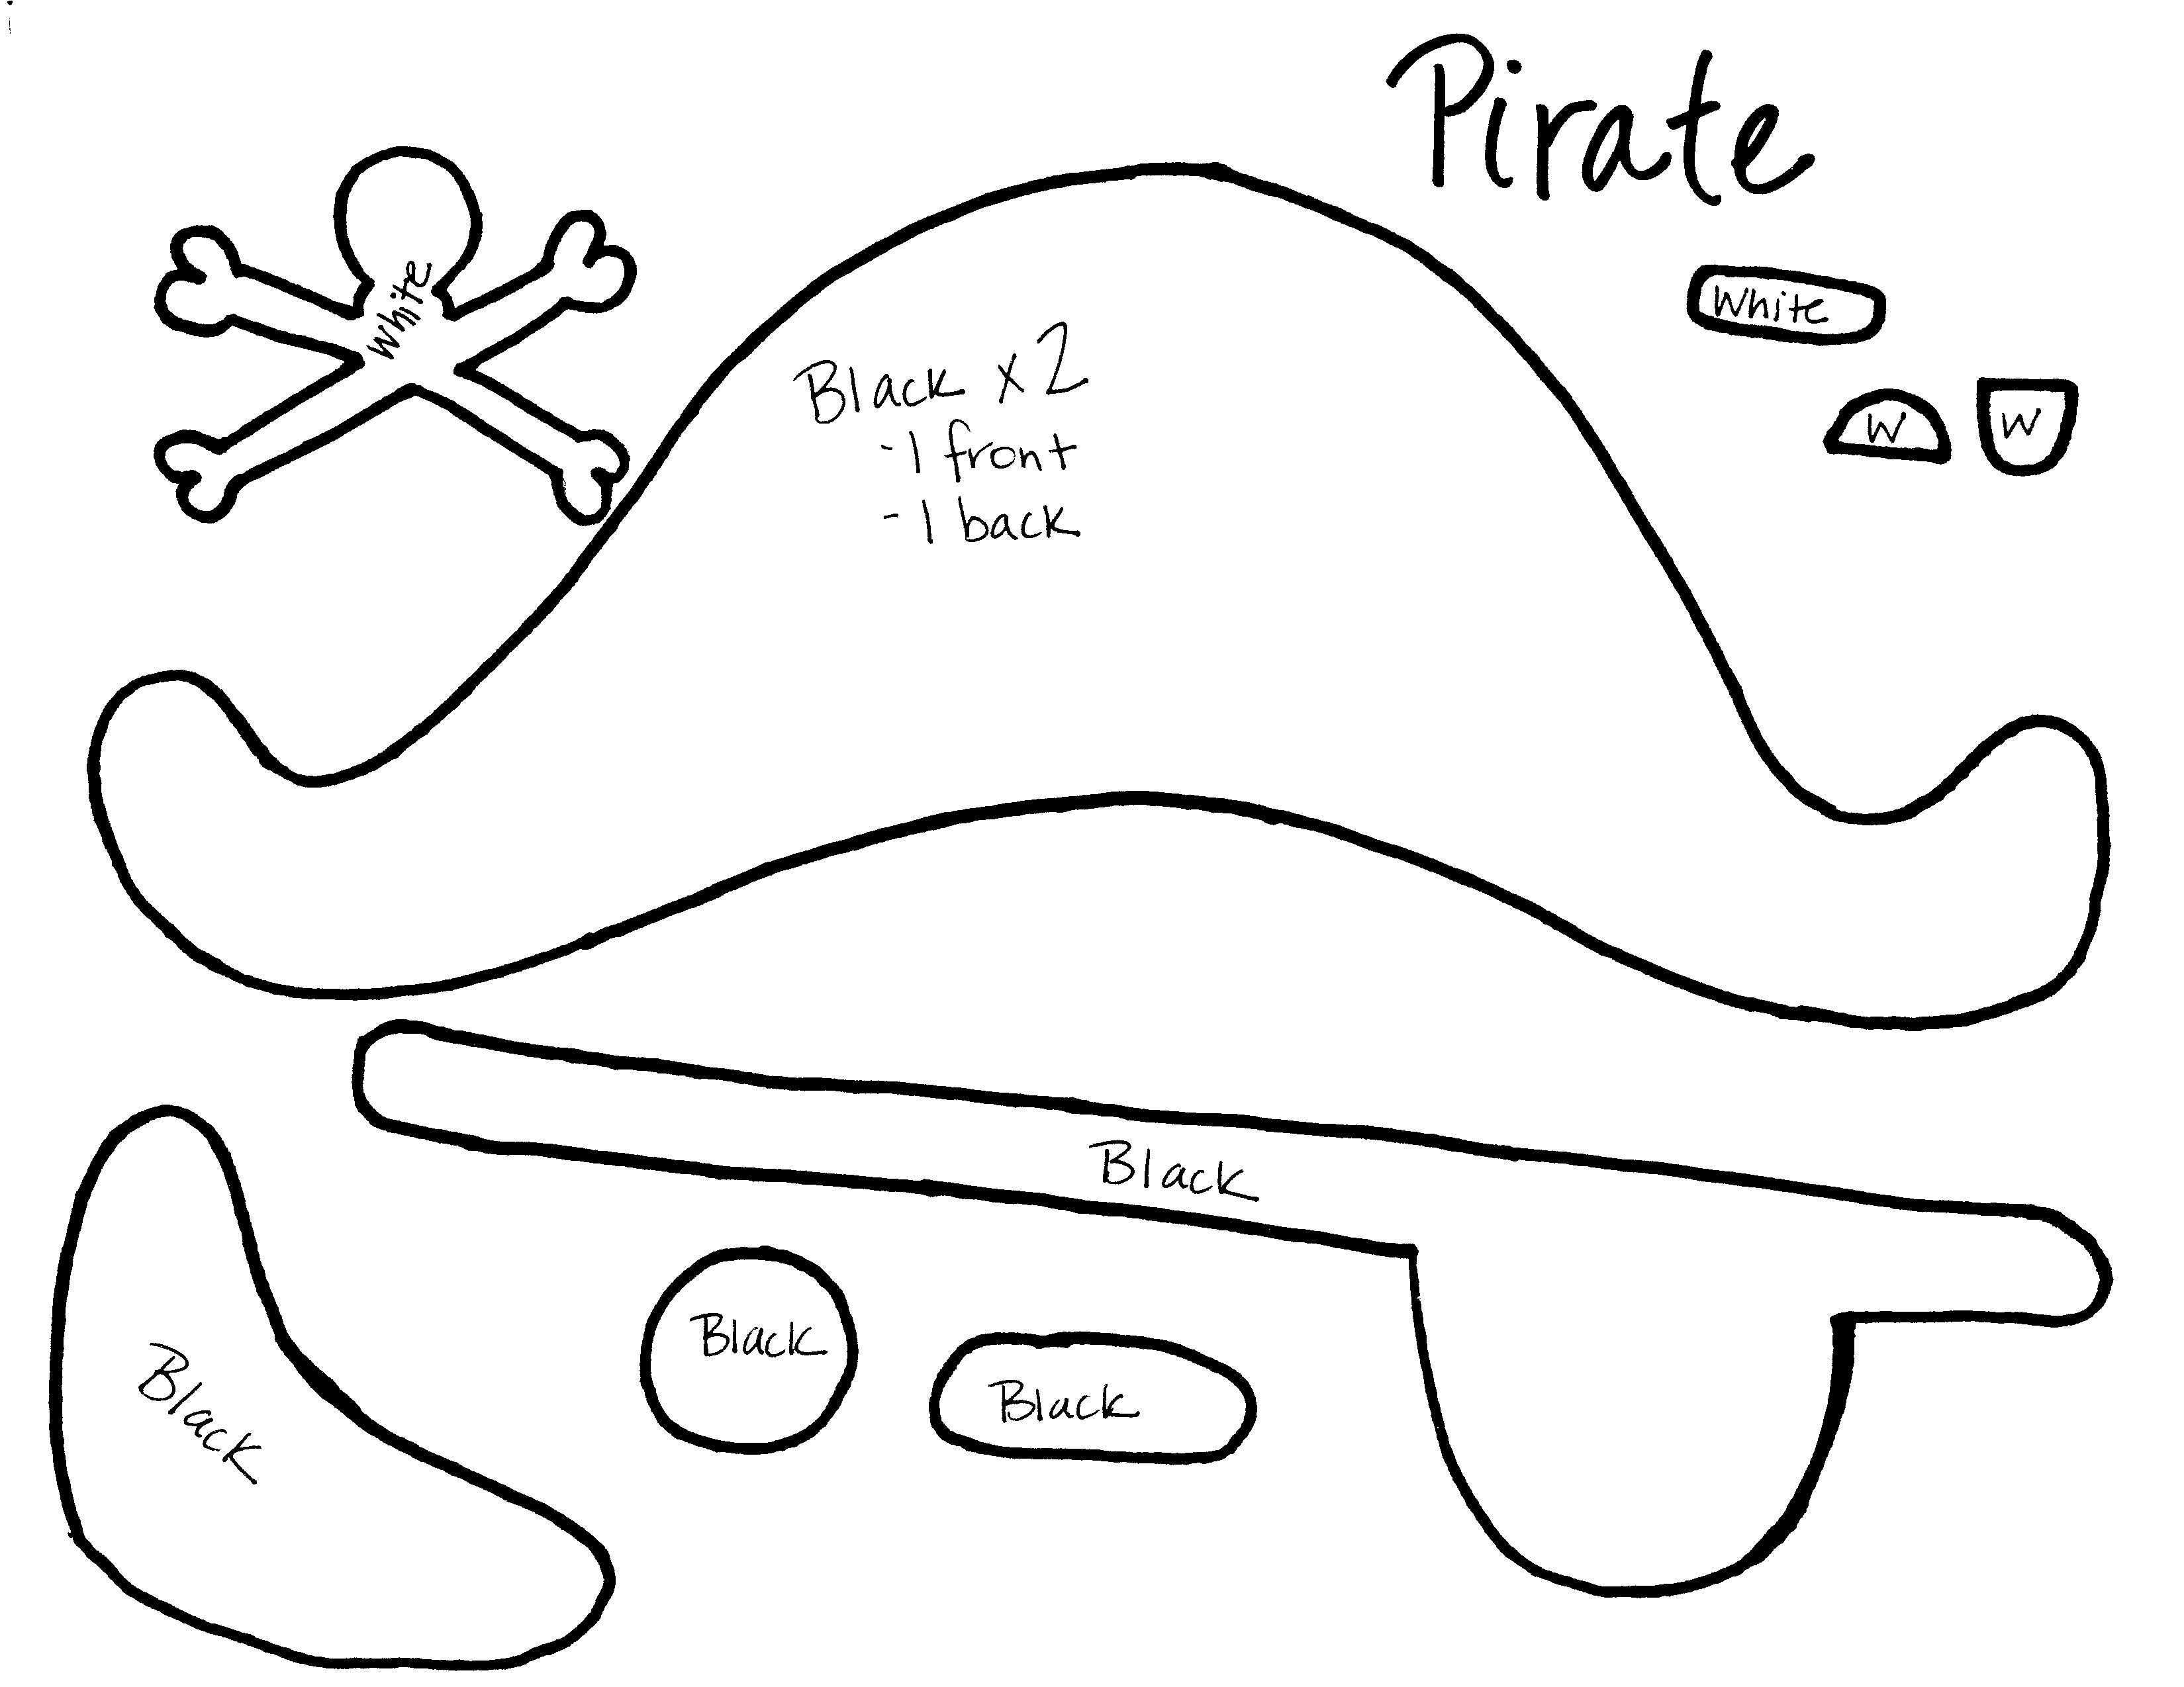 A Pottery Barn Like Halloween Makely Pirate Hat Template Pottery Barn Style Pirate Hat Crafts